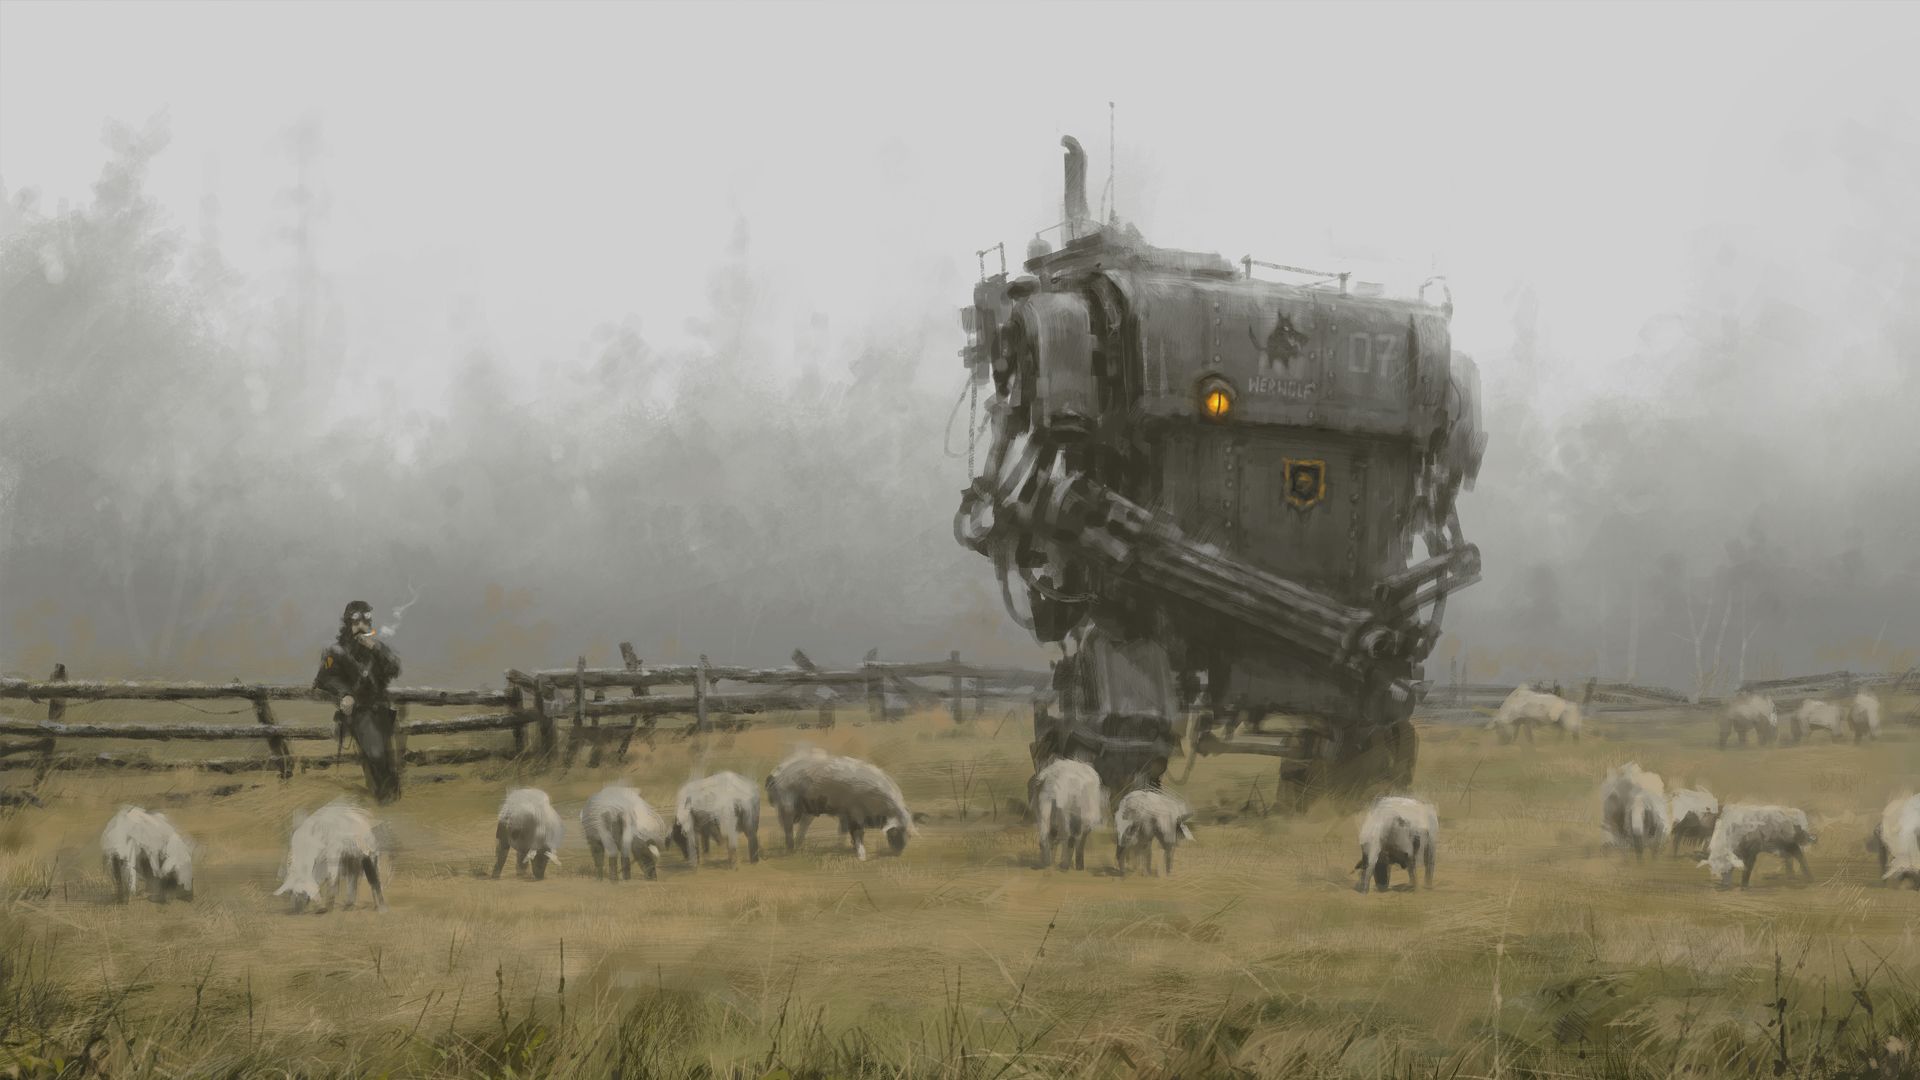 15 brilliantly bizarre paintings of an alternate 1920s with mecha robots and wolves image 1